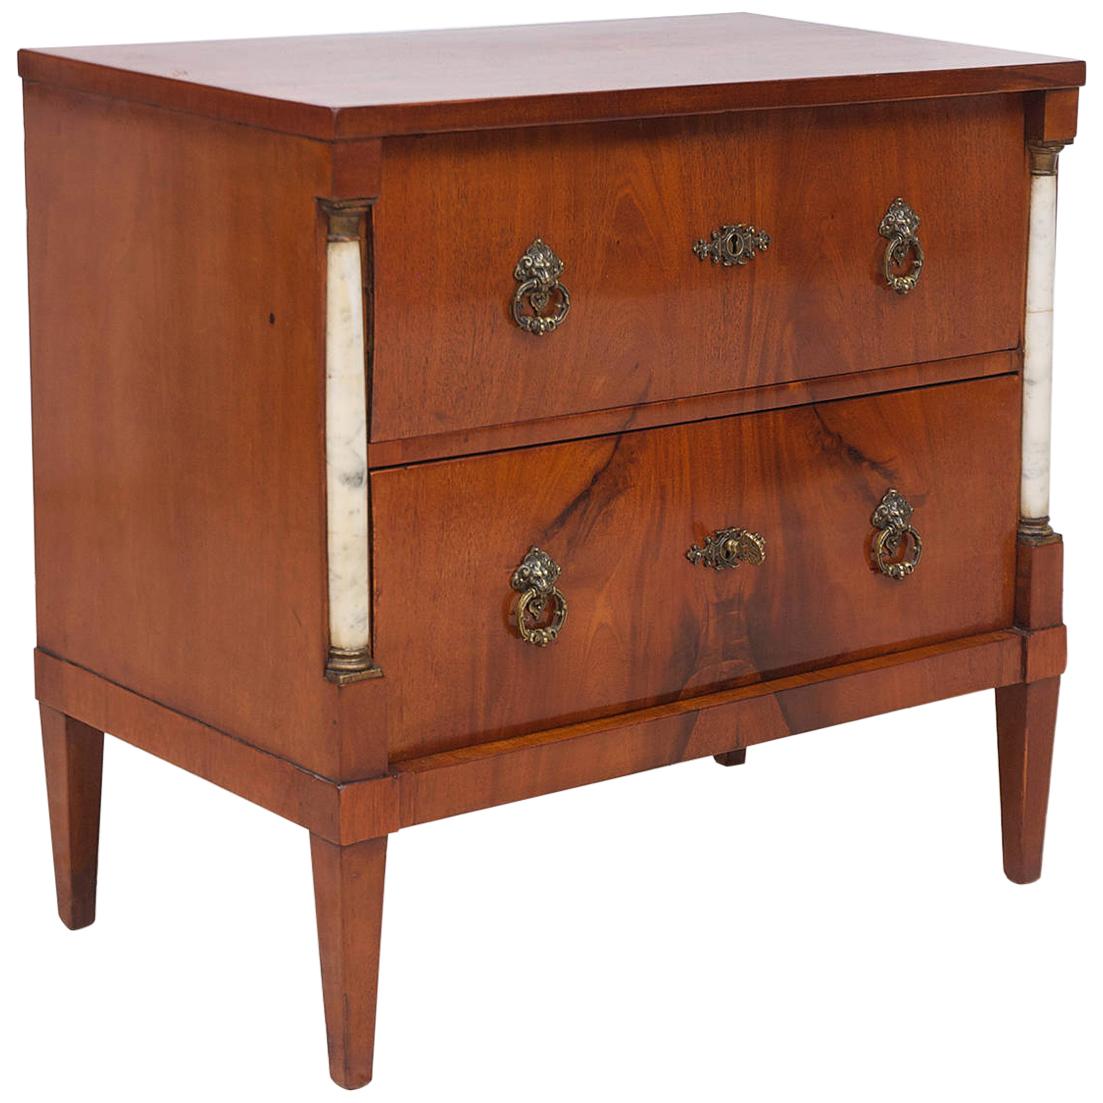 Small Empire Chest of Drawers in Mahogany with Marble Columns, Sweden, c. 1790